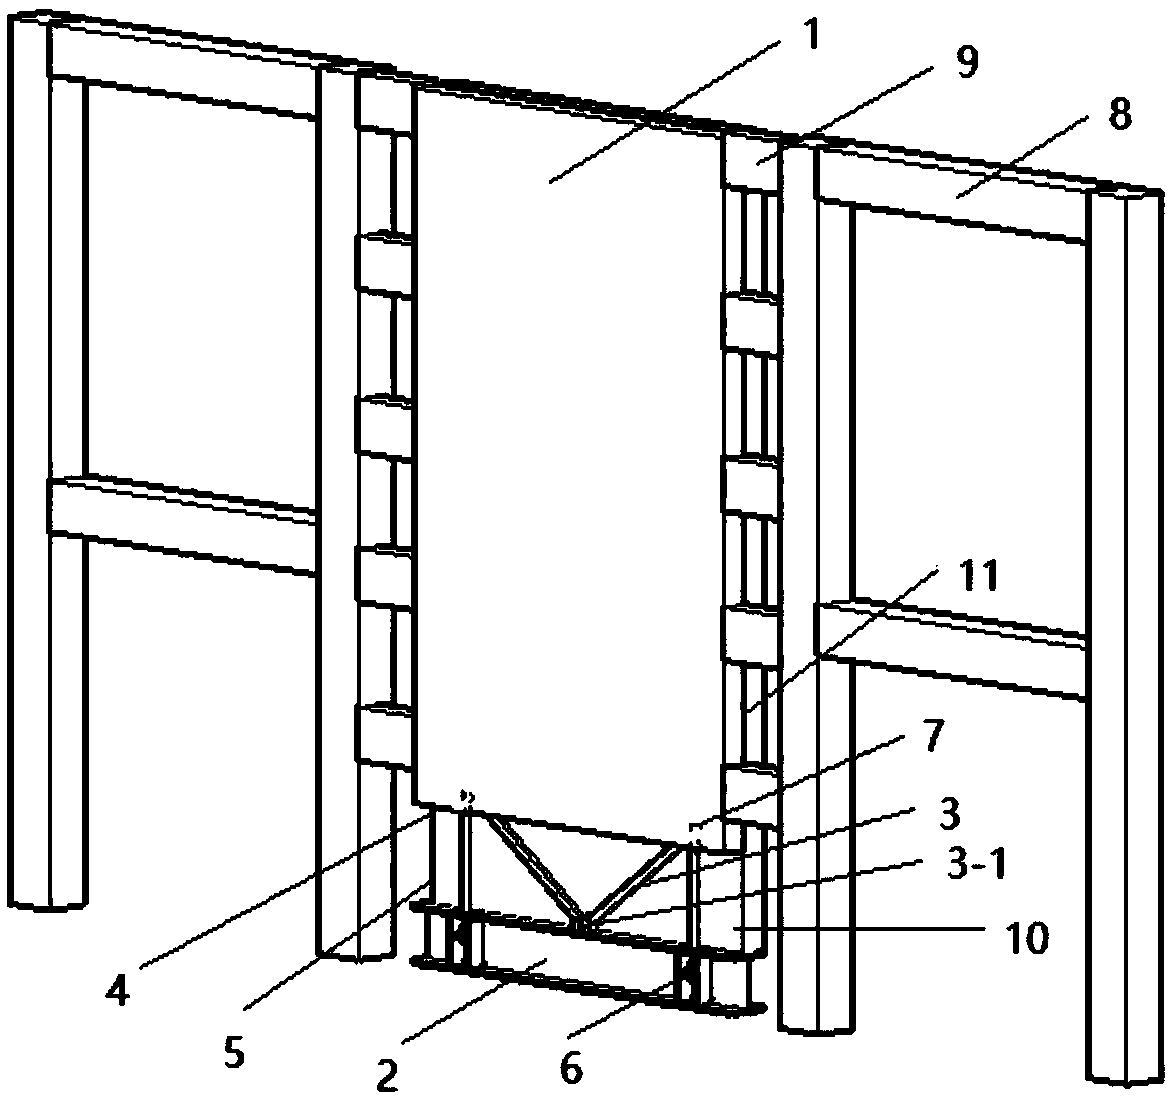 Self-resetting rocking wall with buckling-constrained shape memory alloy bars and building